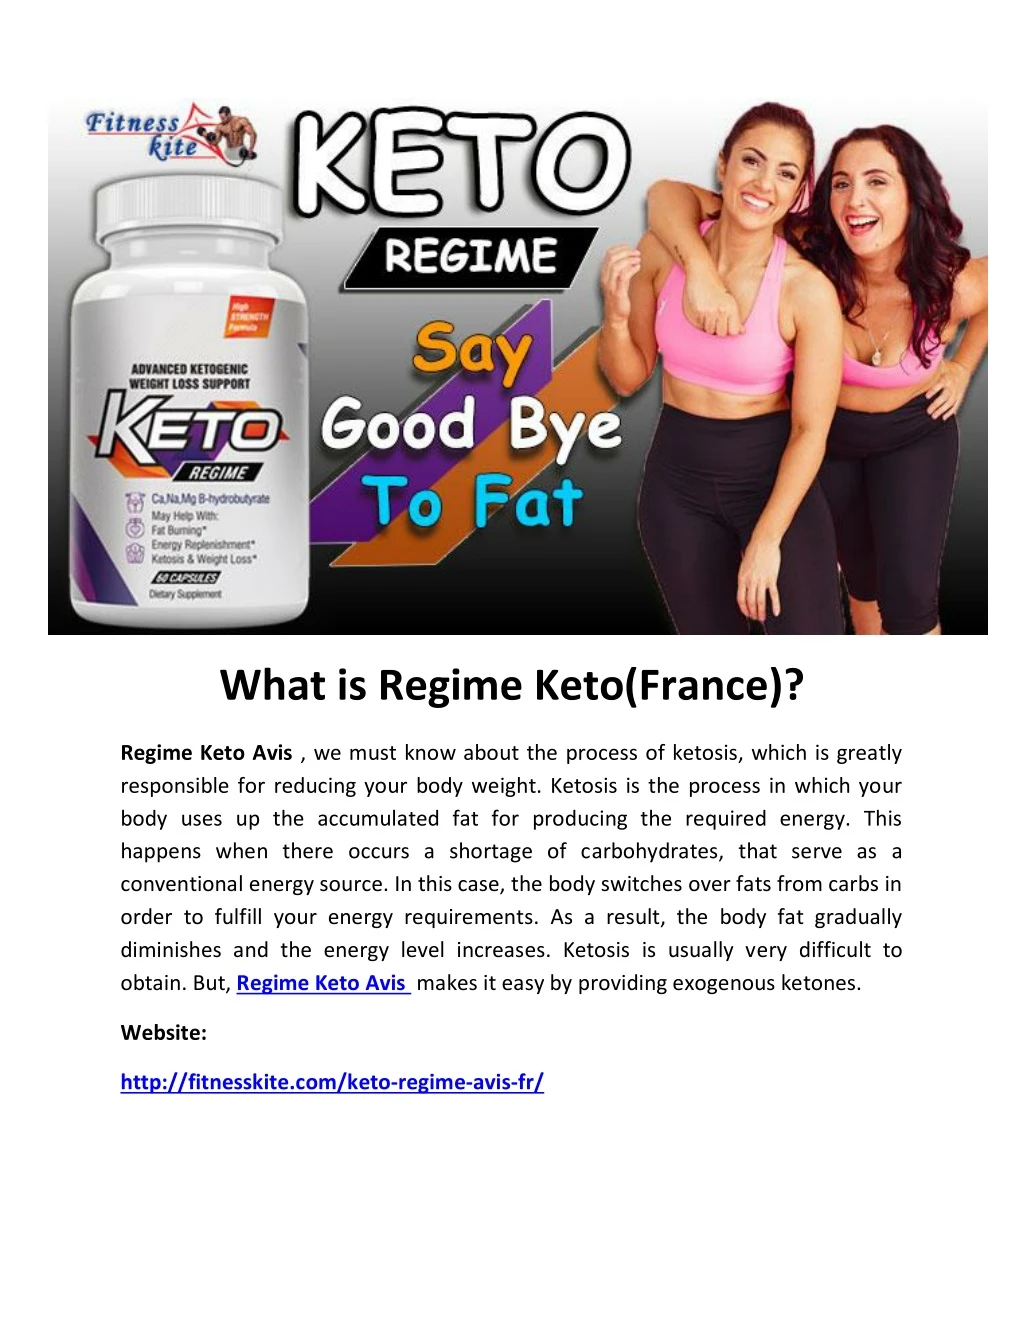 what is regime keto france